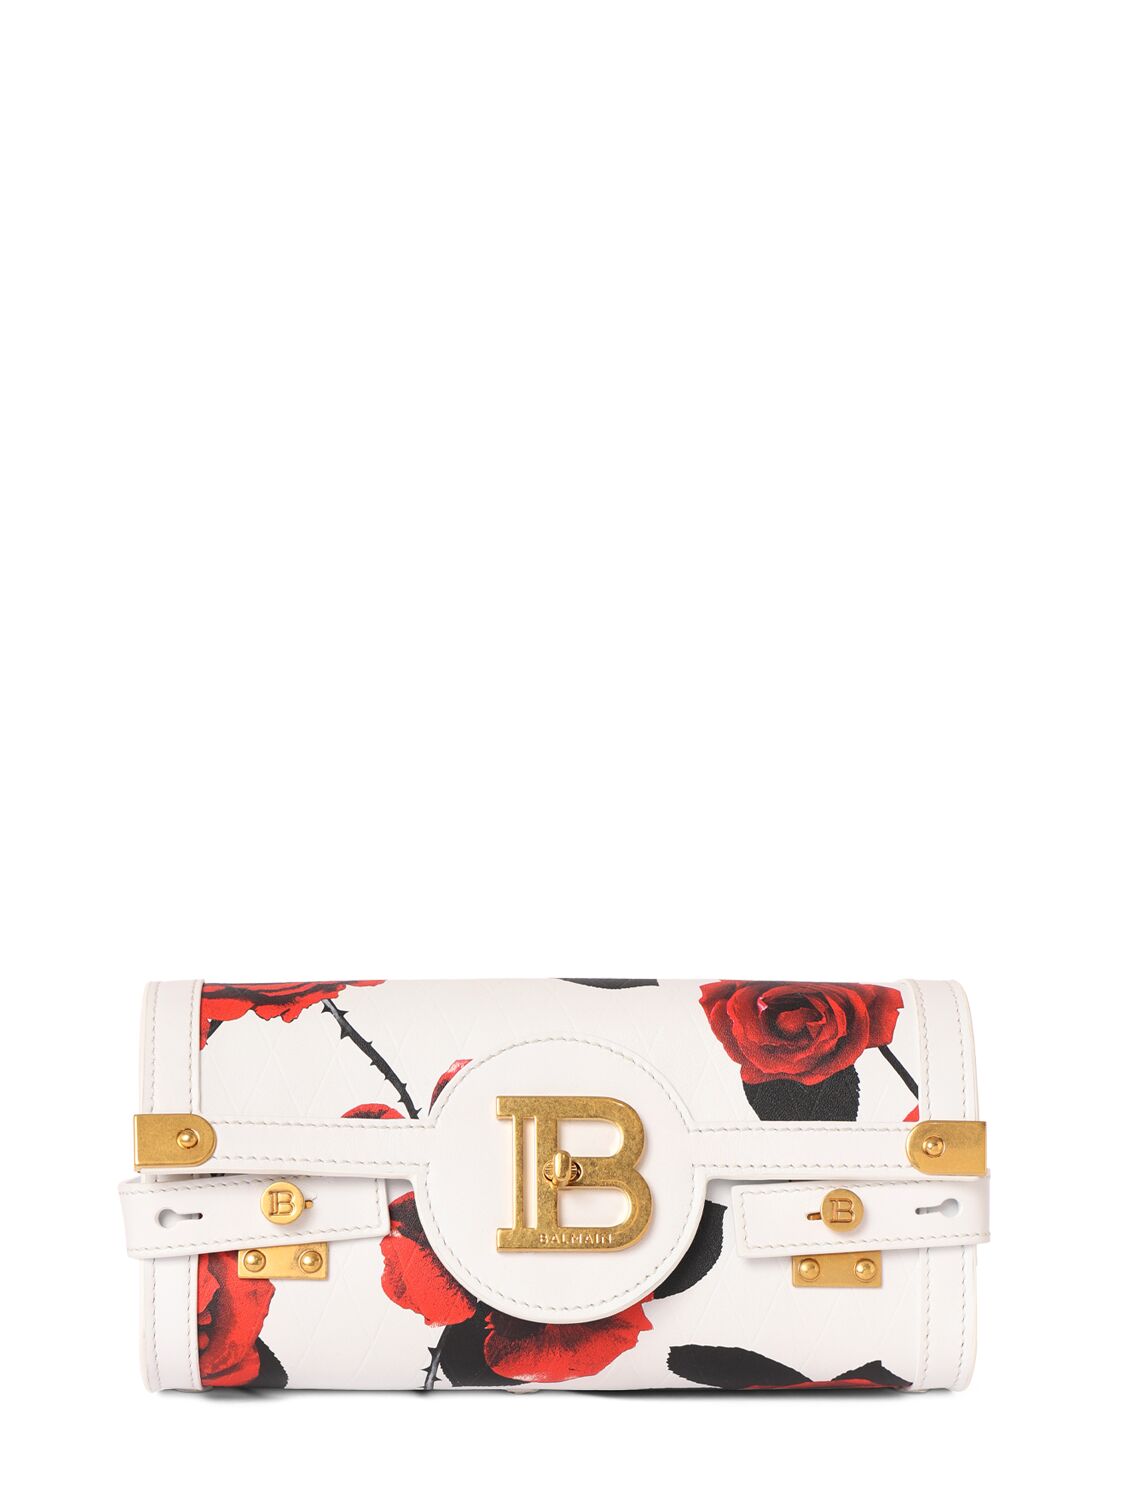 B-buzz 23 Printed Leather Bag